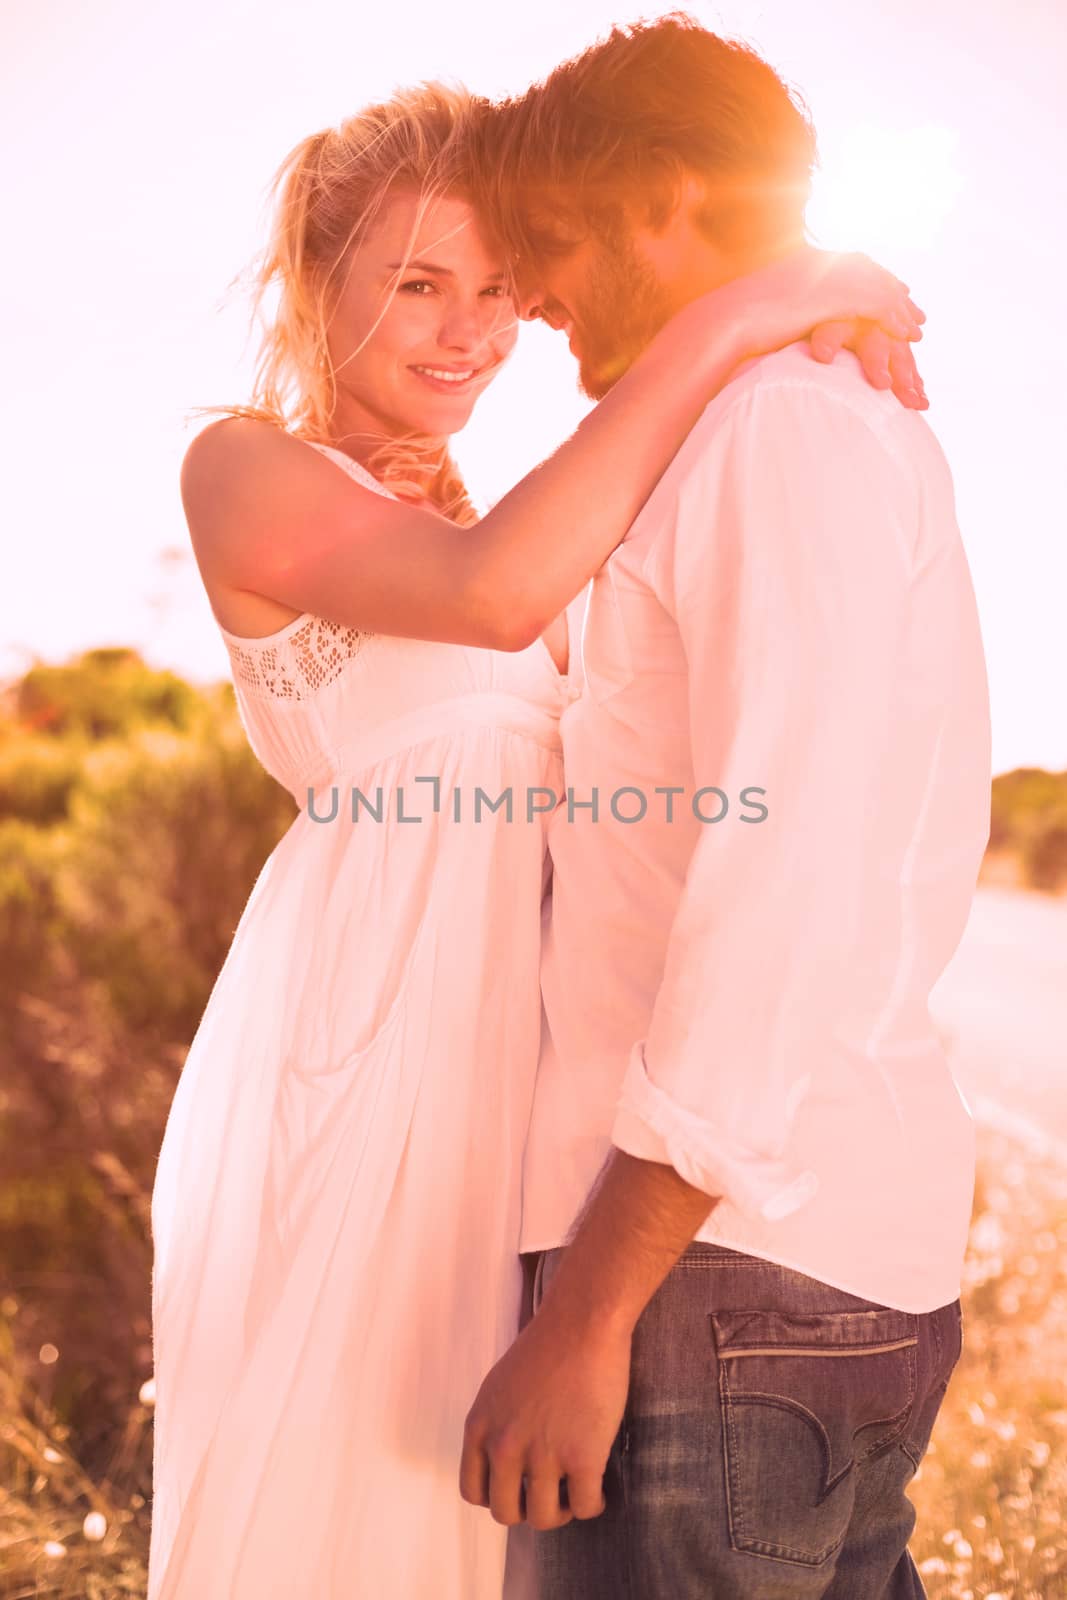 Attractive couple embracing by the road on a sunny day